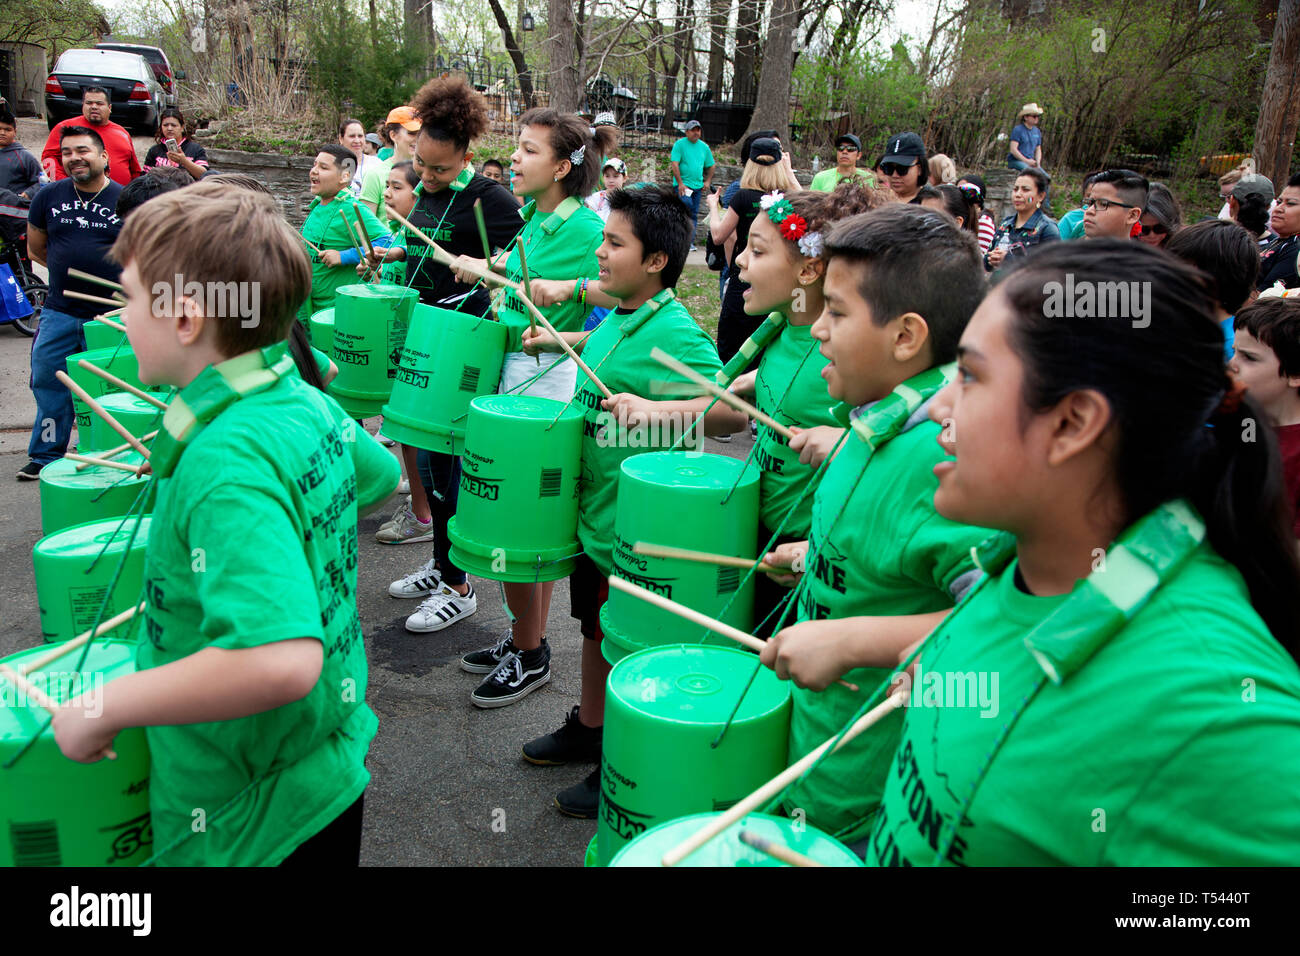 Students from Wellstone School in the Drumline with Menards green pails at the Cinco de Mayo Parade. St Paul Minnesota MN USA Stock Photo